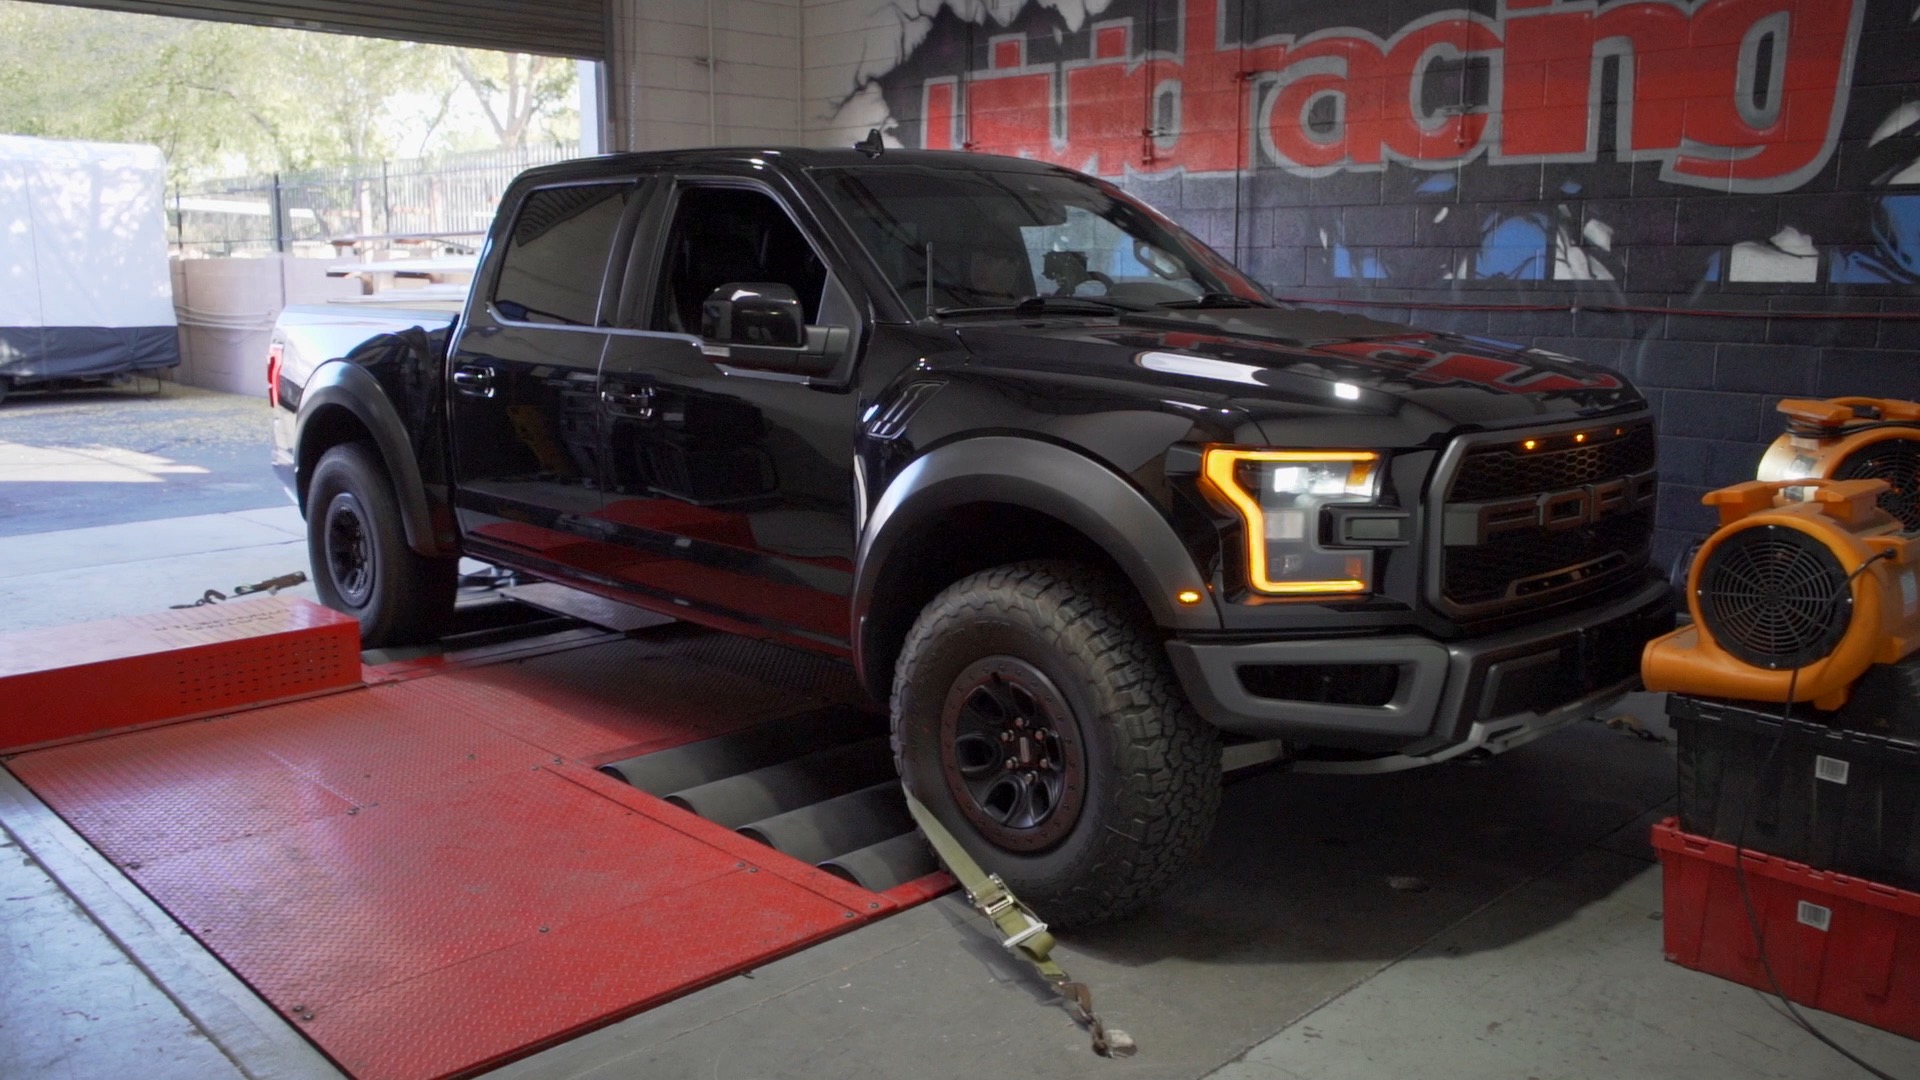 The 10 Best Ford Raptor Upgrades To Improve Performance And Add  Functionality